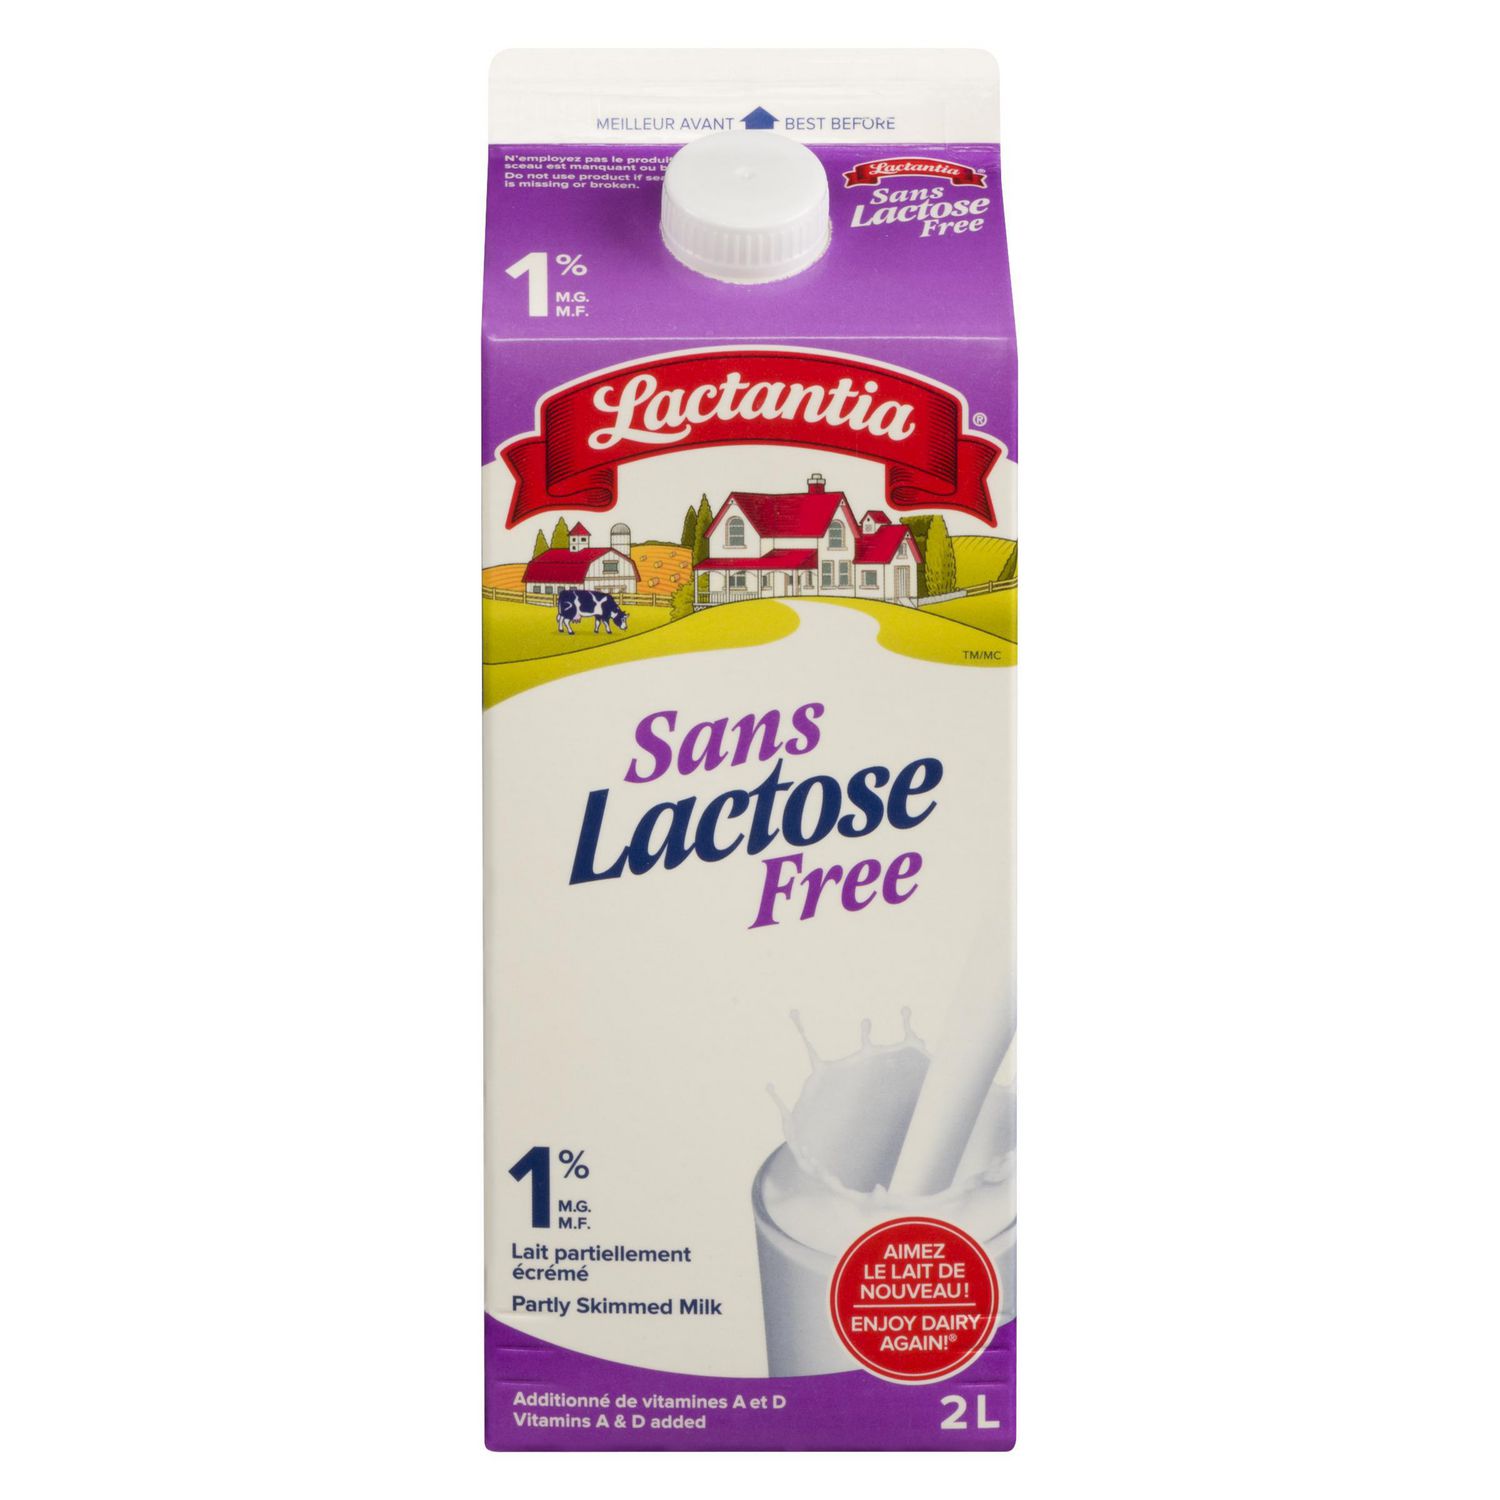 walmart wic approved lactose free milk